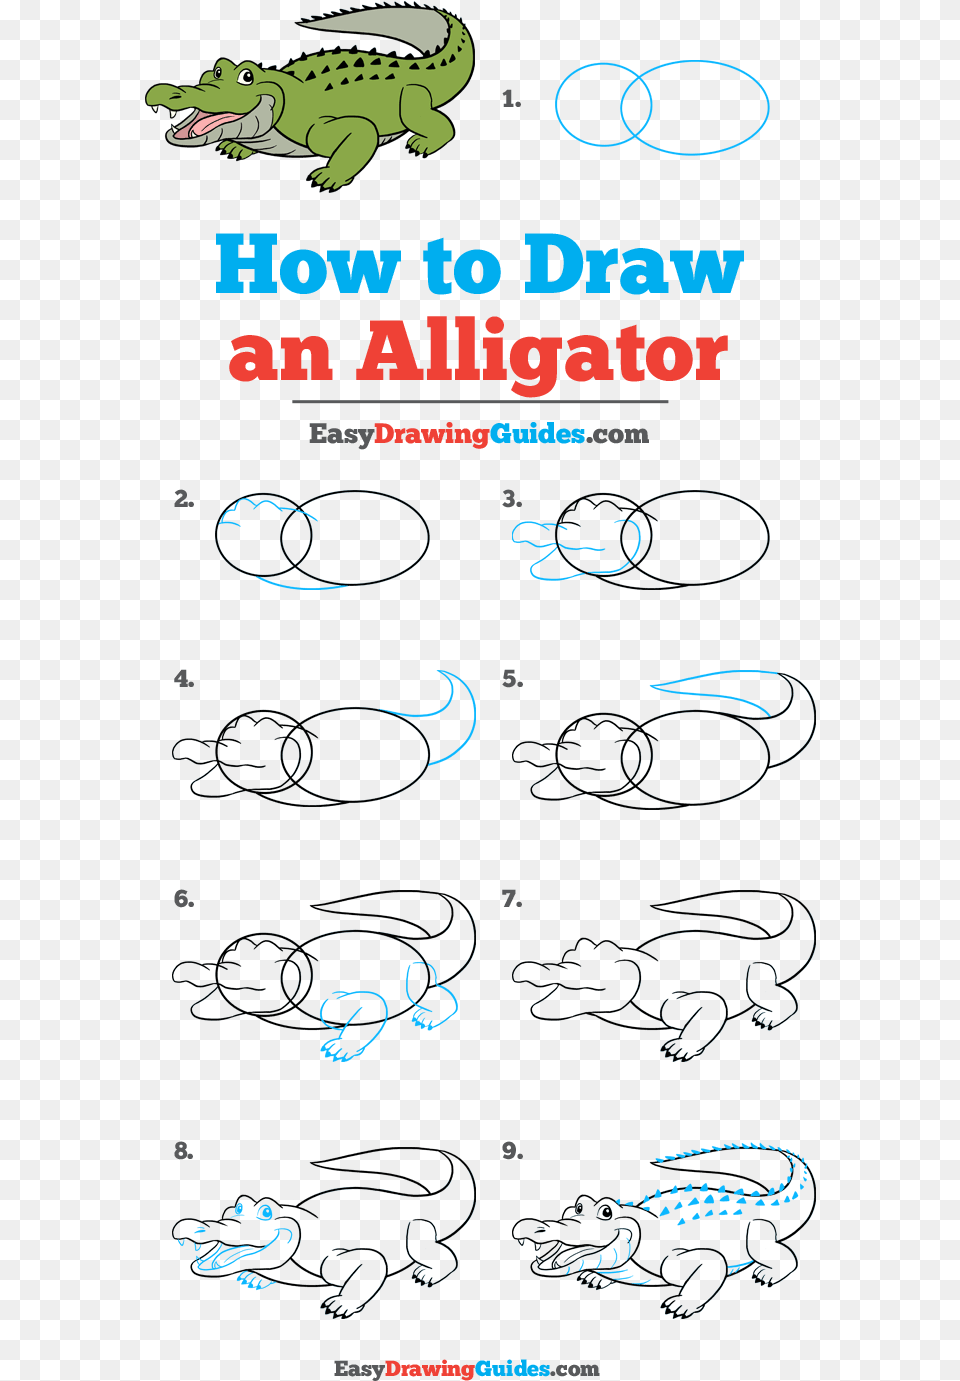 How To Draw Alligator Draw A Playground Step By Step, Animal, Dinosaur, Reptile, Text Png